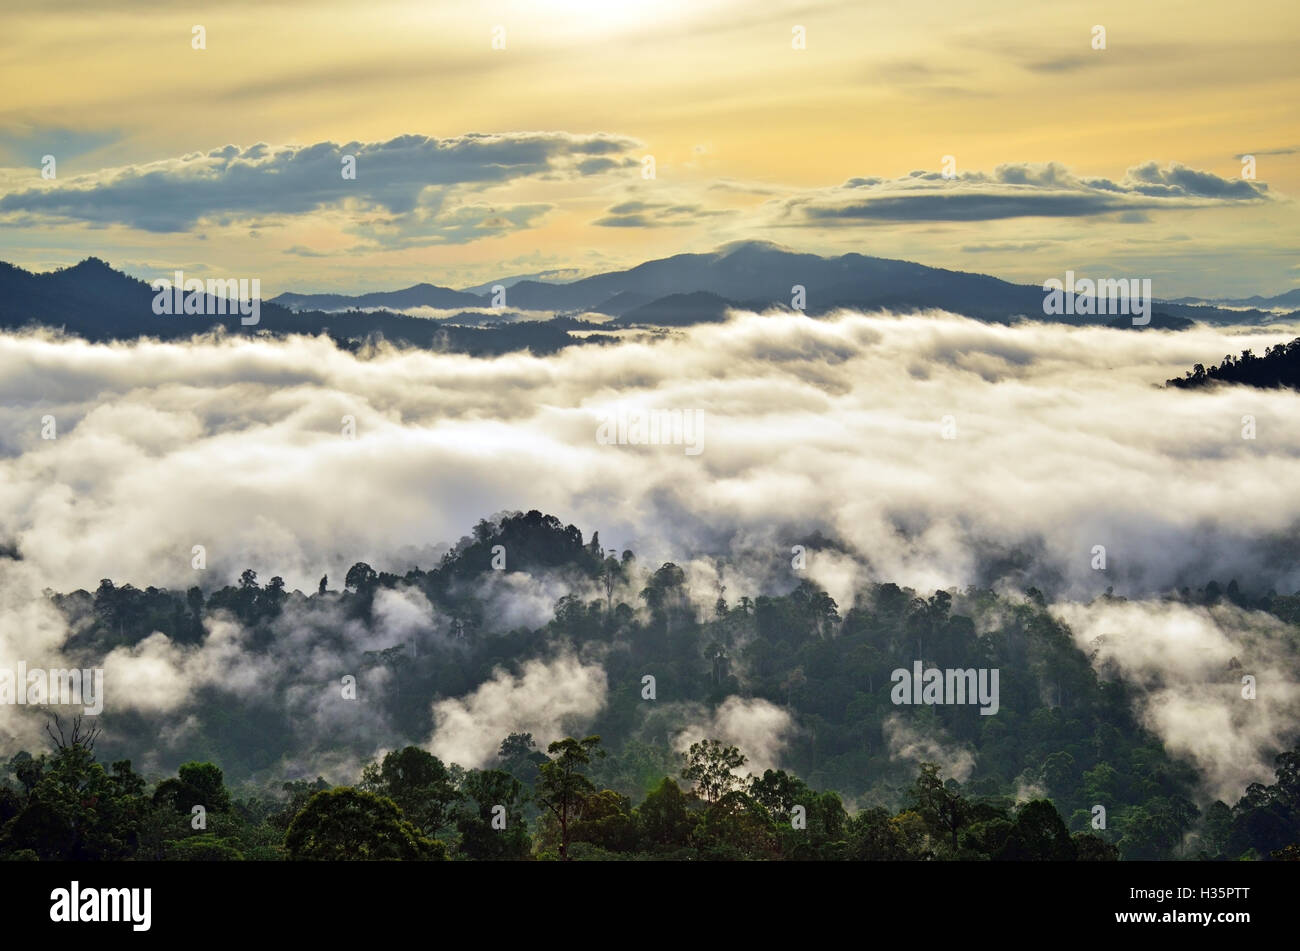 Sunrise with fogs and mist over rain forest in Danum Valley Conservation Area in Lahad Datu, Sabah Borneo, Malaysia. Stock Photo